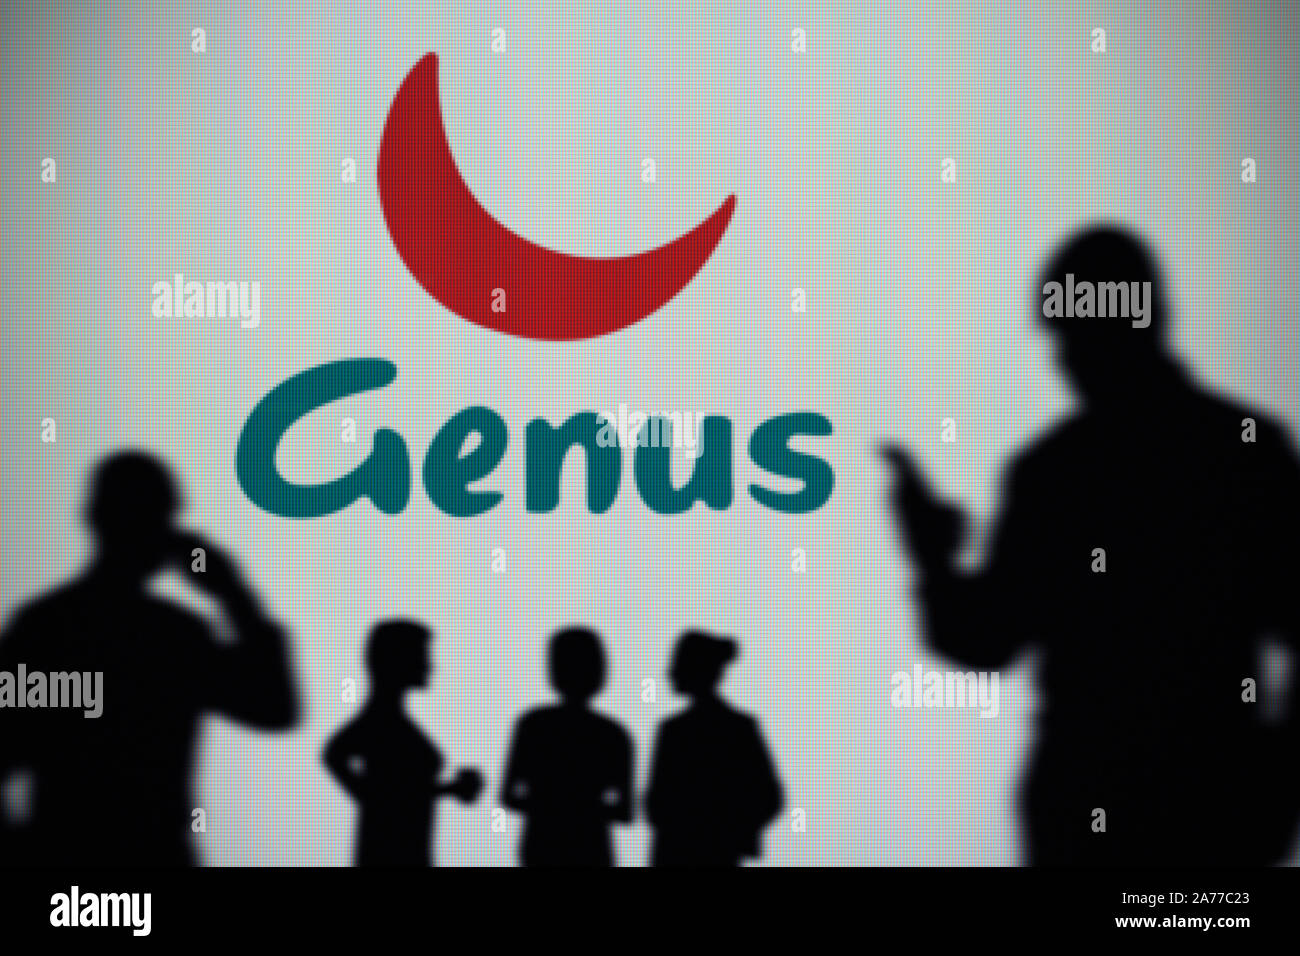 The Genus plc logo is seen on an LED screen in the background while a silhouetted person uses a smartphone (Editorial use only) Stock Photo